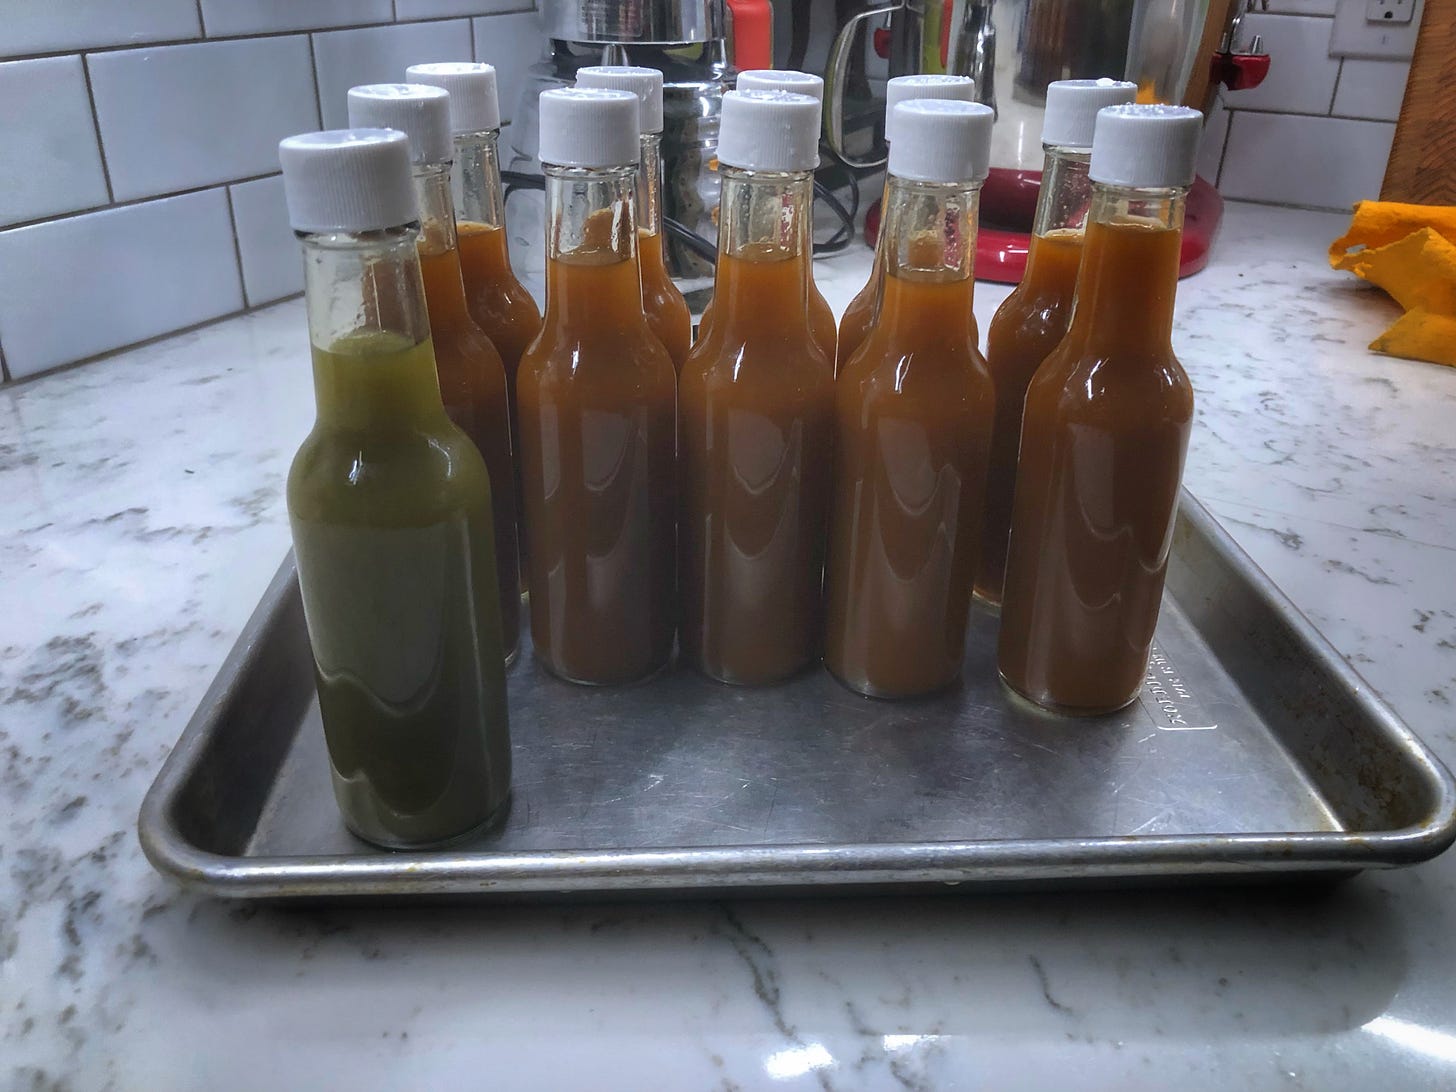 Bottles of hot sauce on a metal tray. The sauce in one bottle is green while the others are russet.